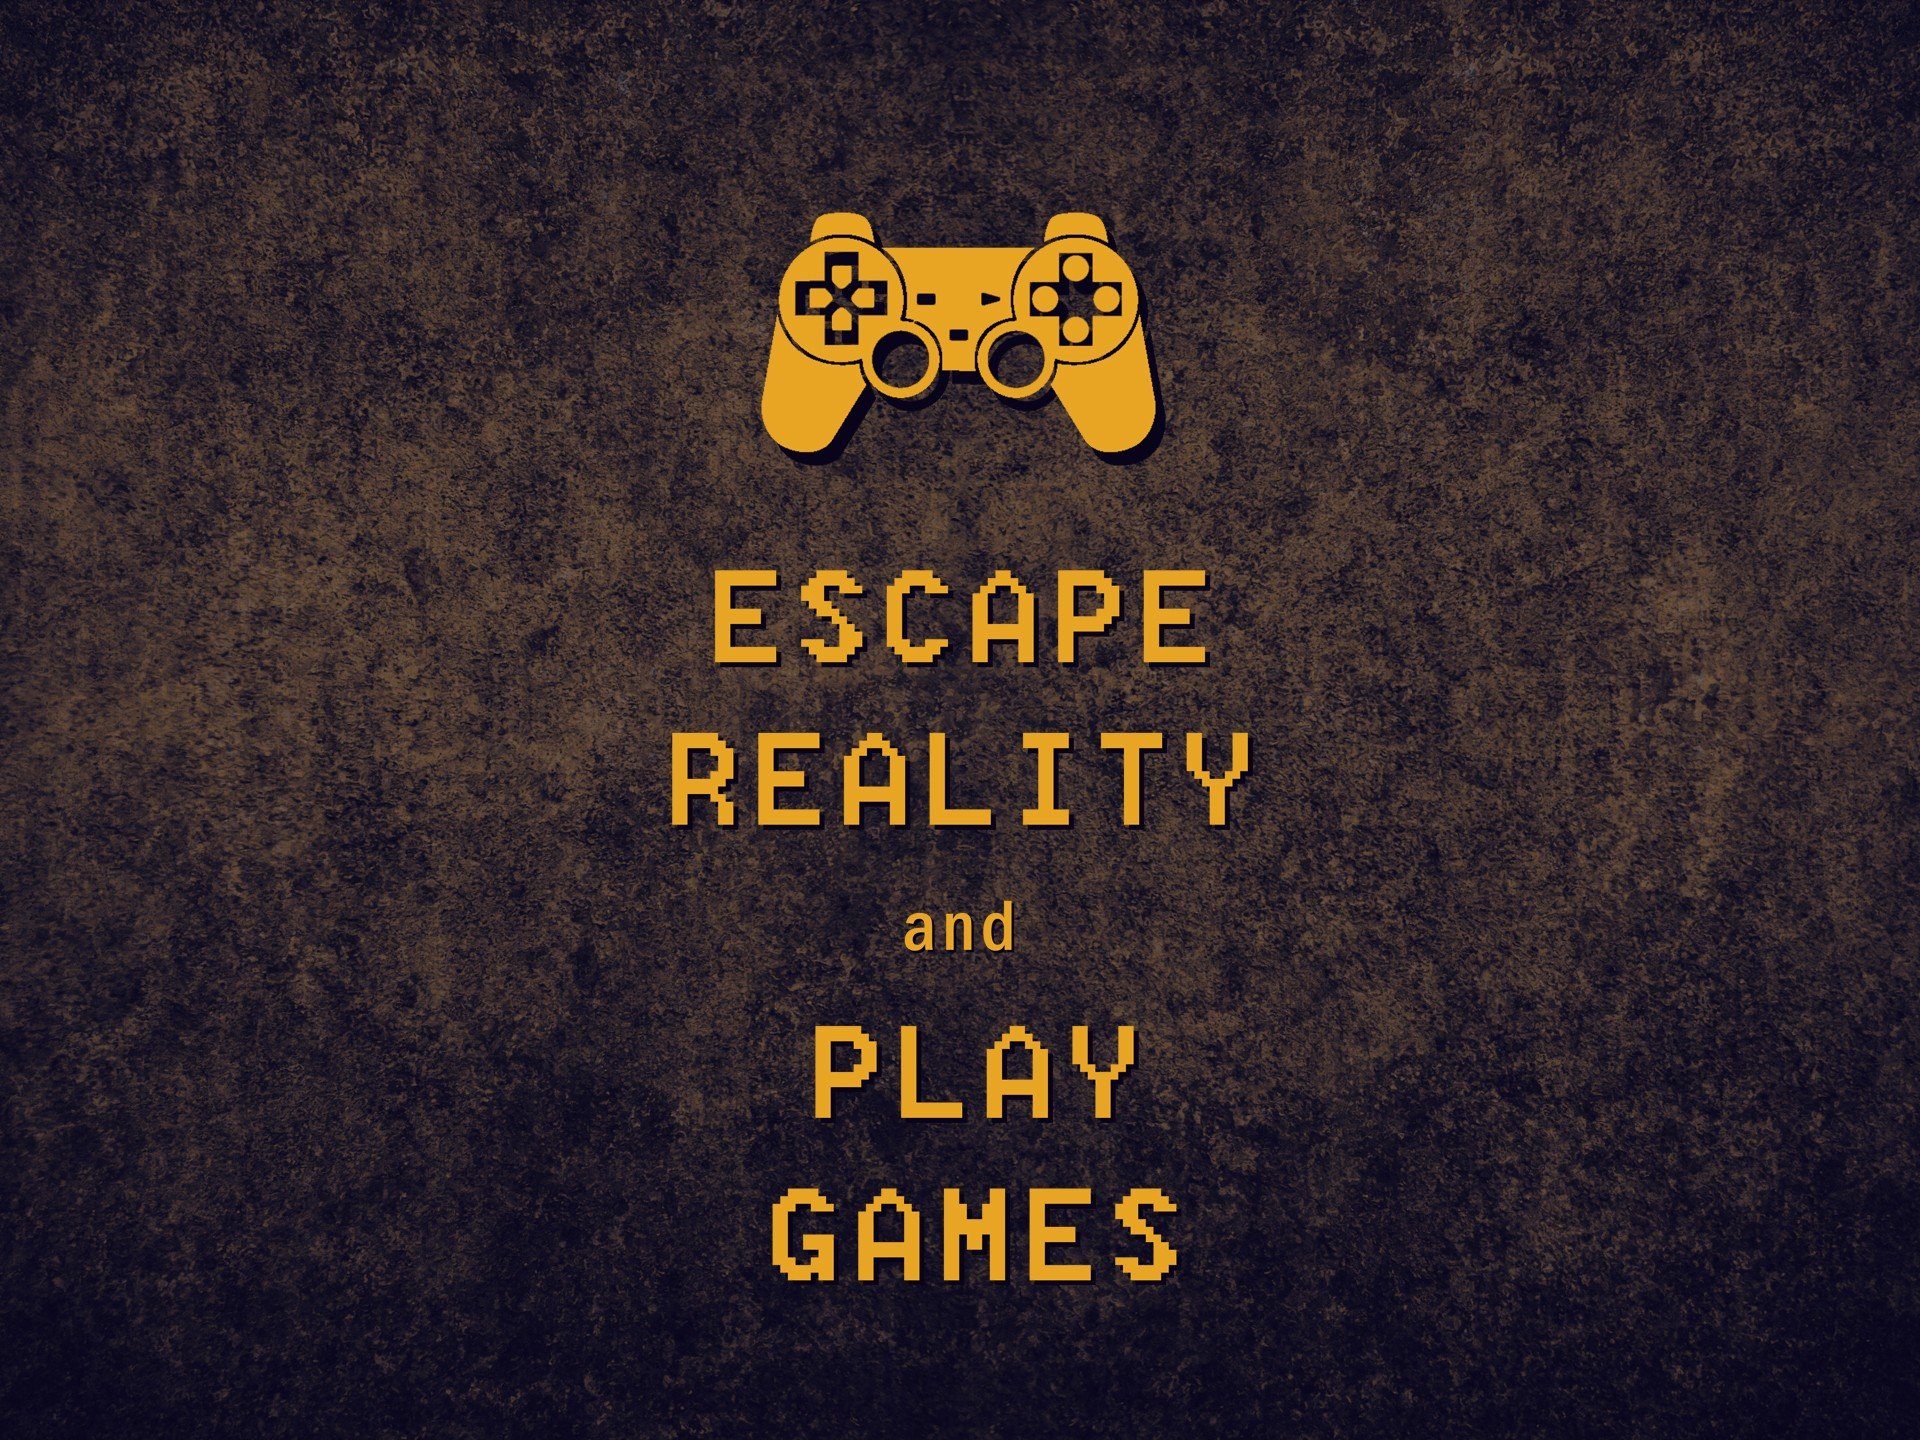 video, Games, Escape, Reality, Controllers, Keep, Calm, And, Games Wallpaper